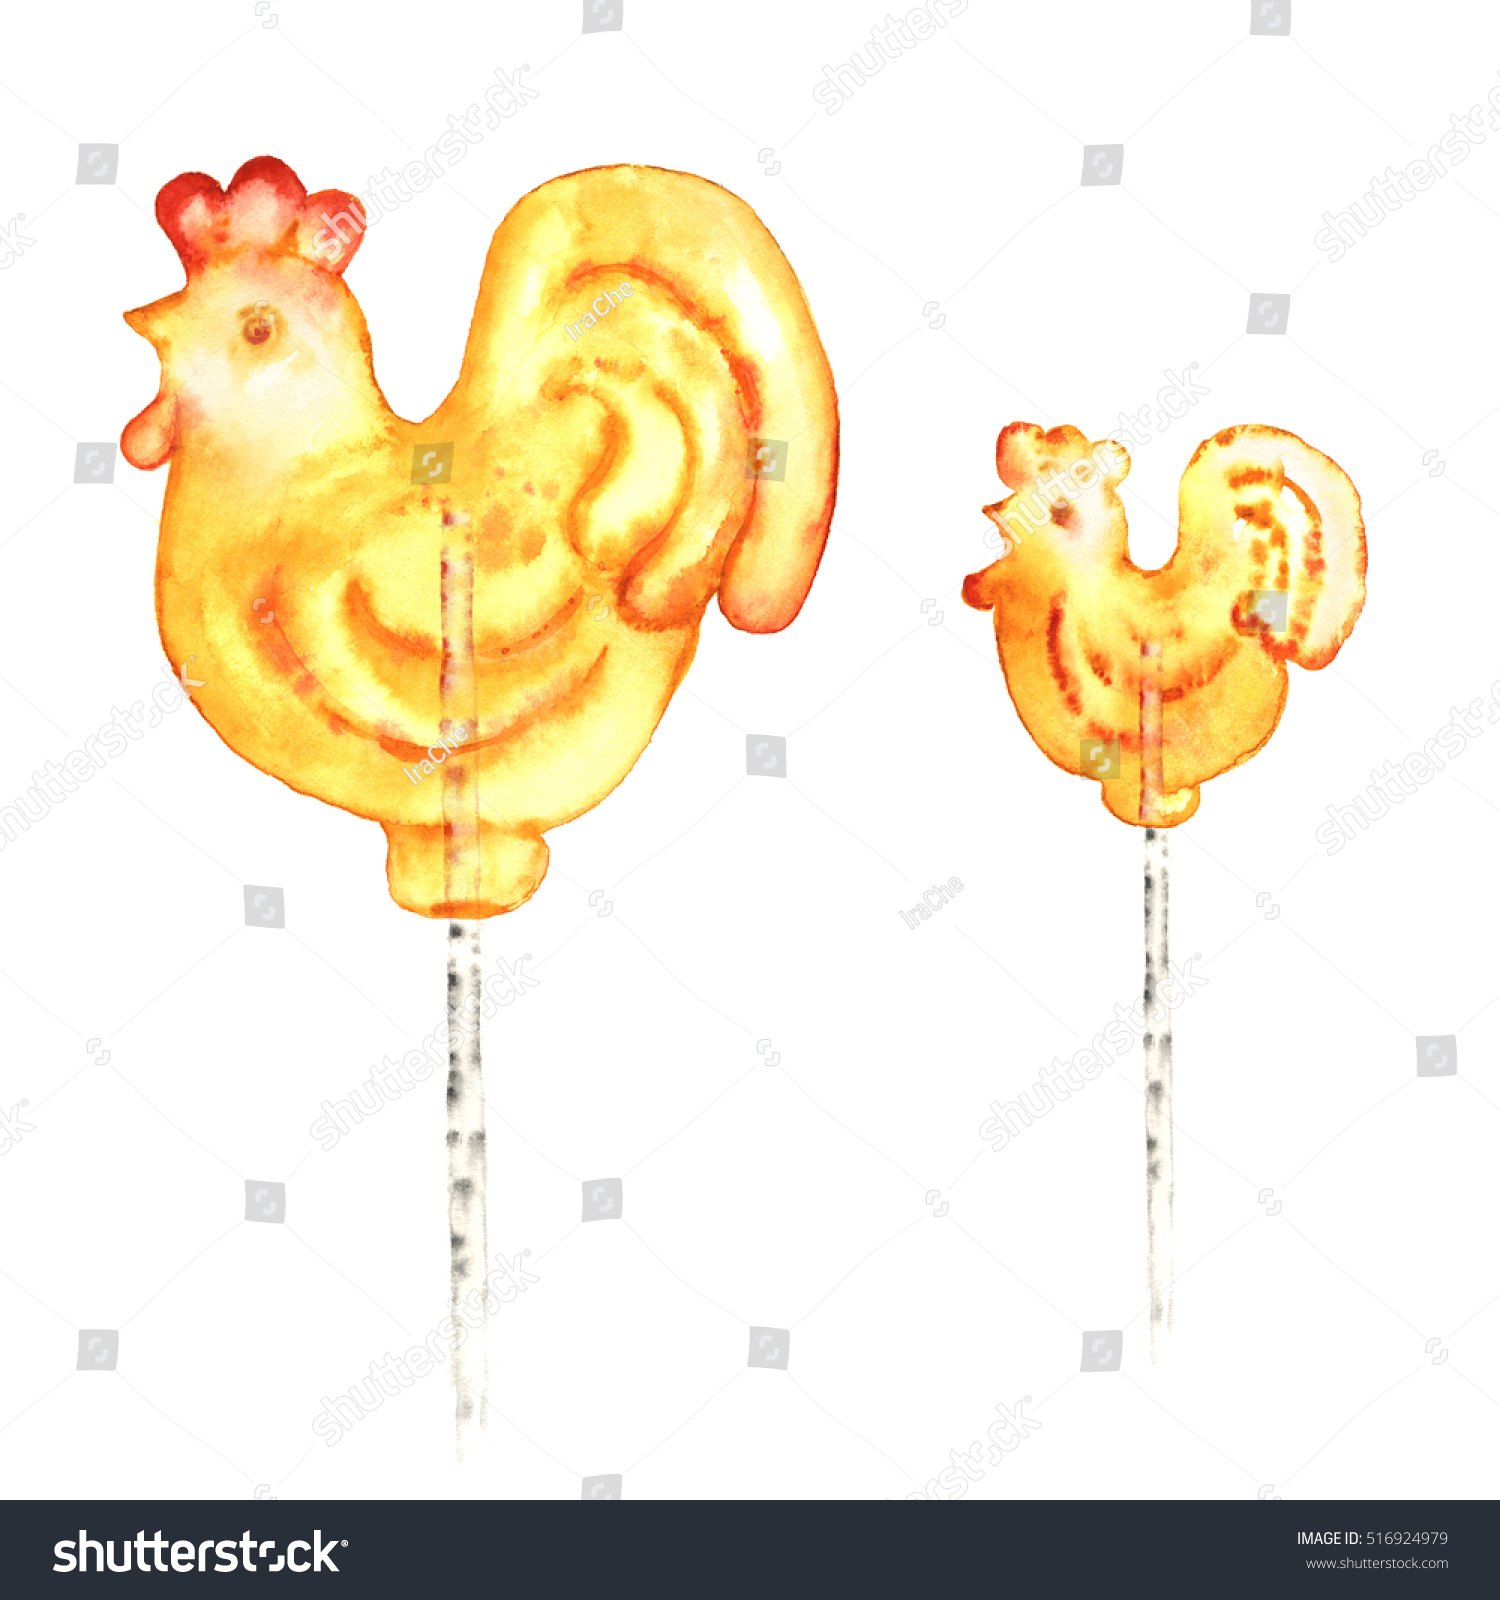 Red Yellow Cock Lollipops On White Stock Illustration 516924979 ...